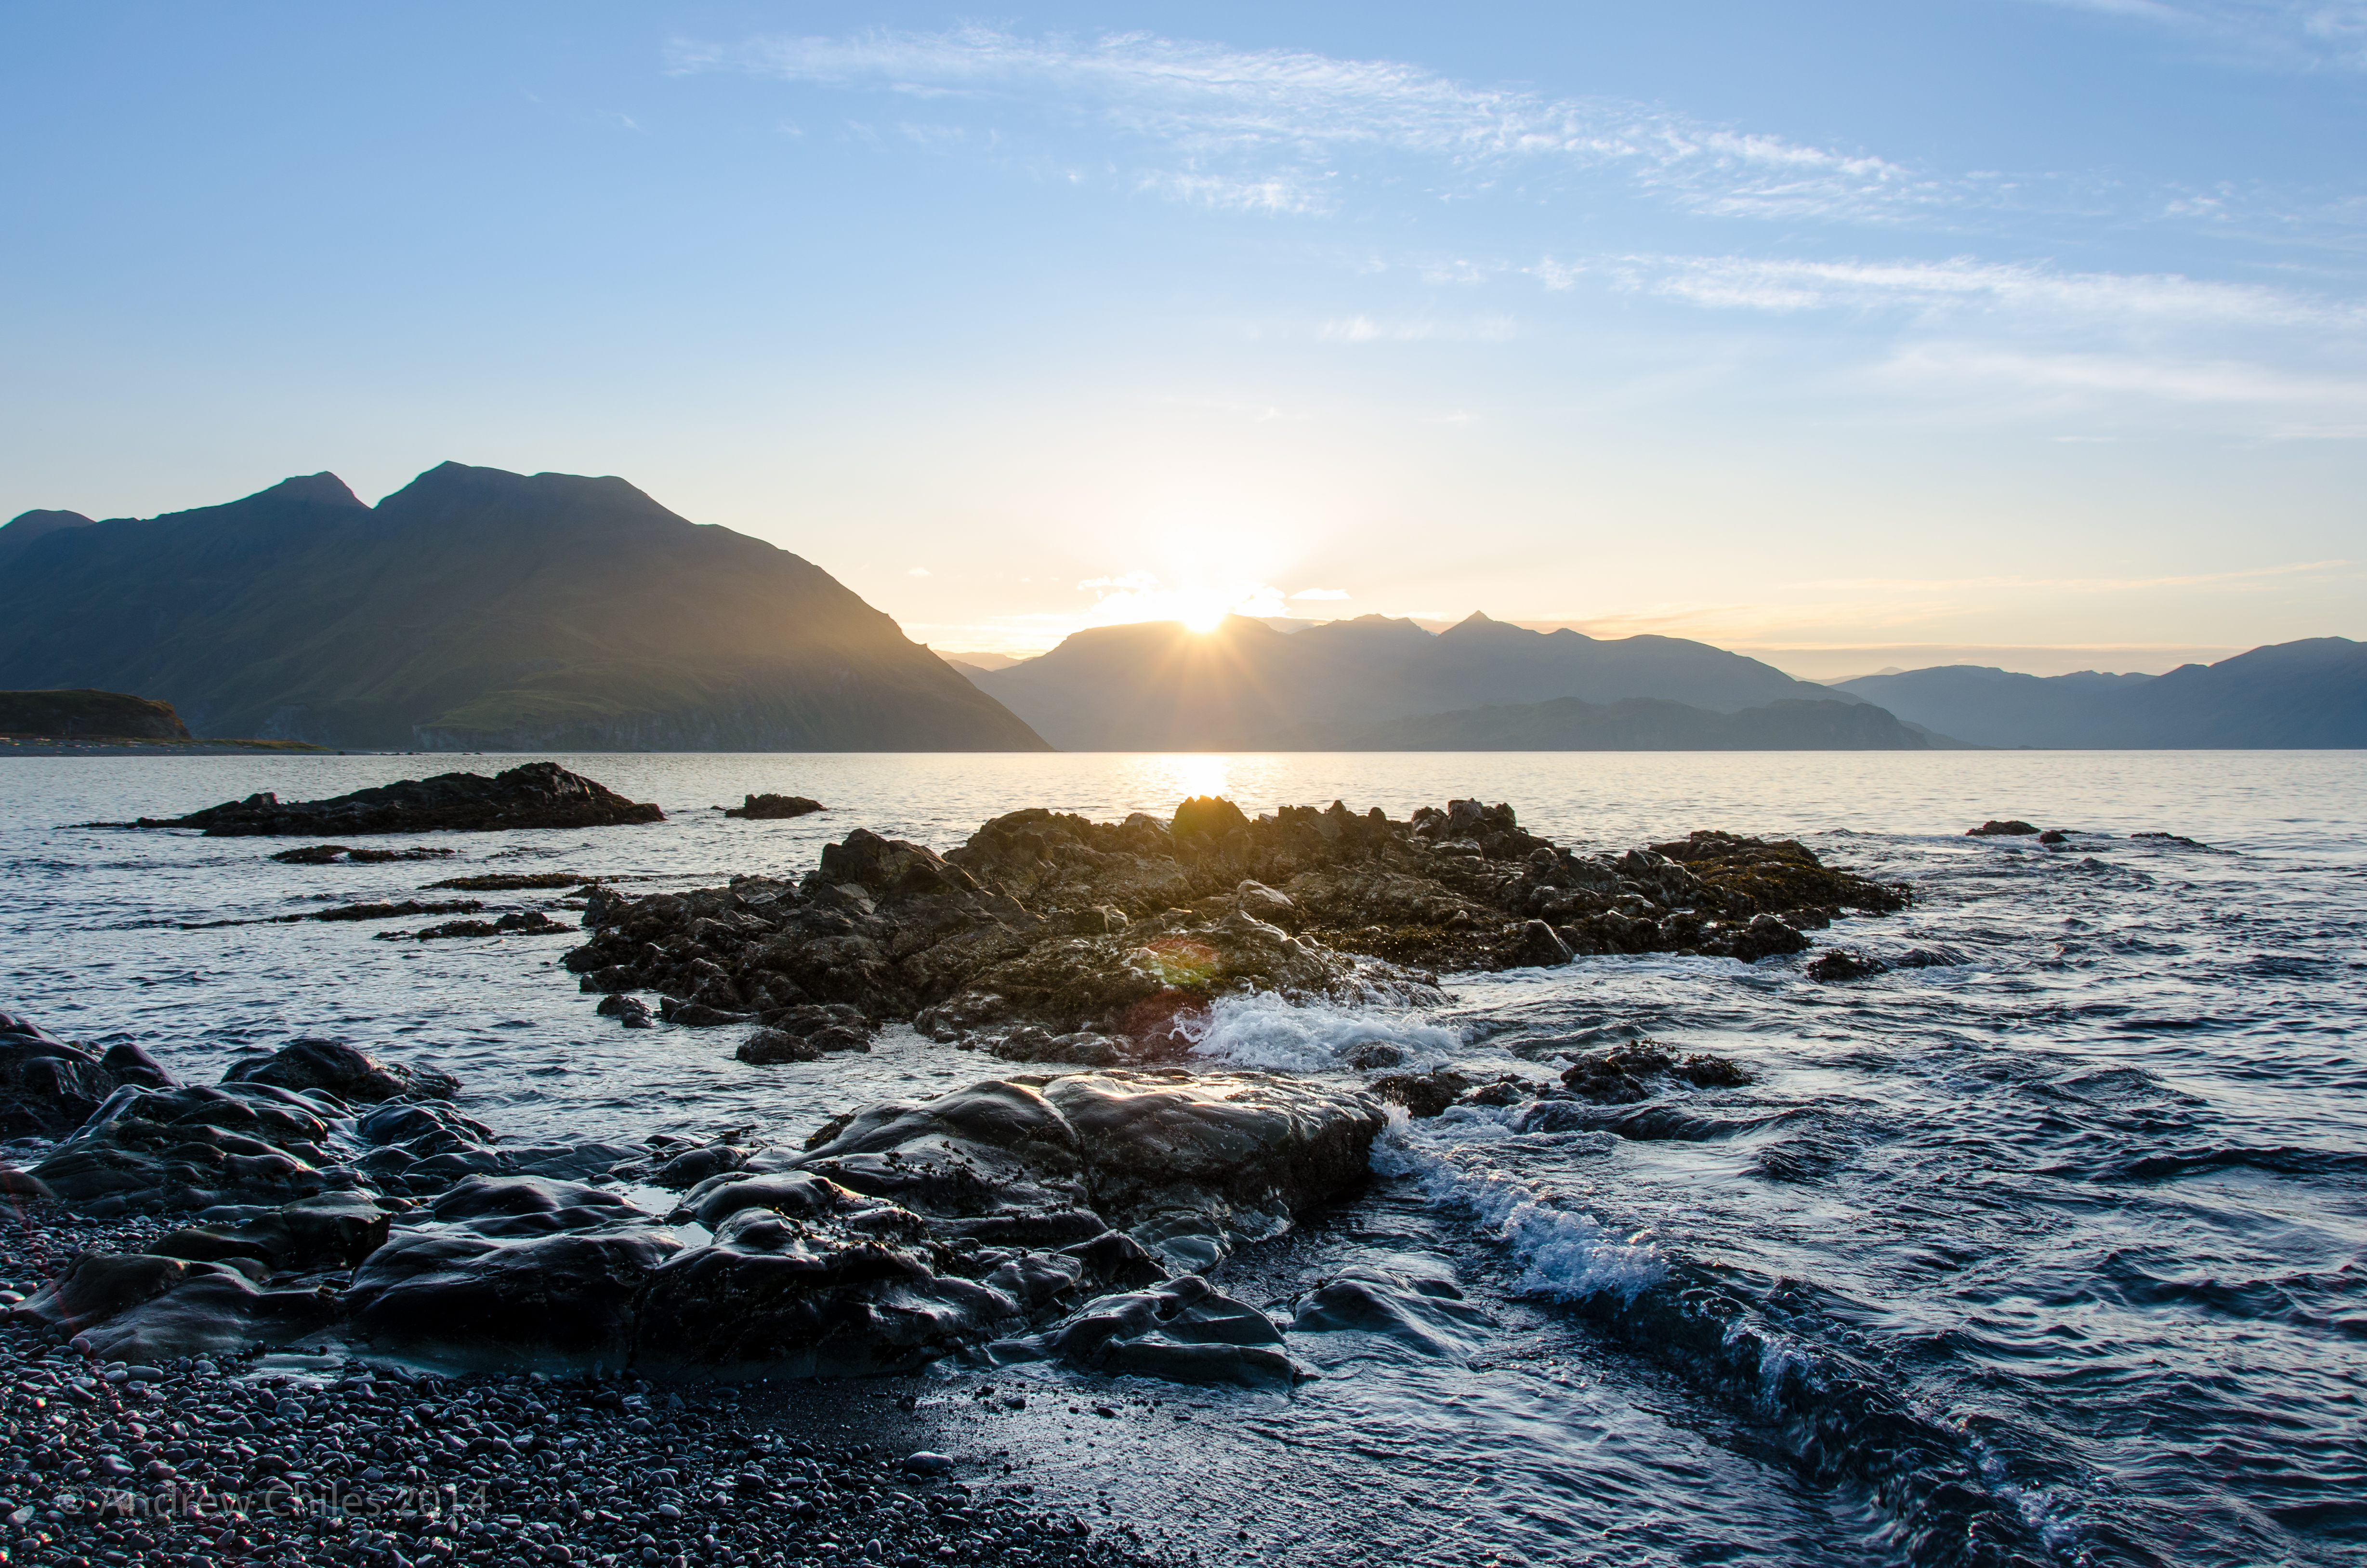 Sunset over Unalaska Bay - Photograph by Andrew Chiles